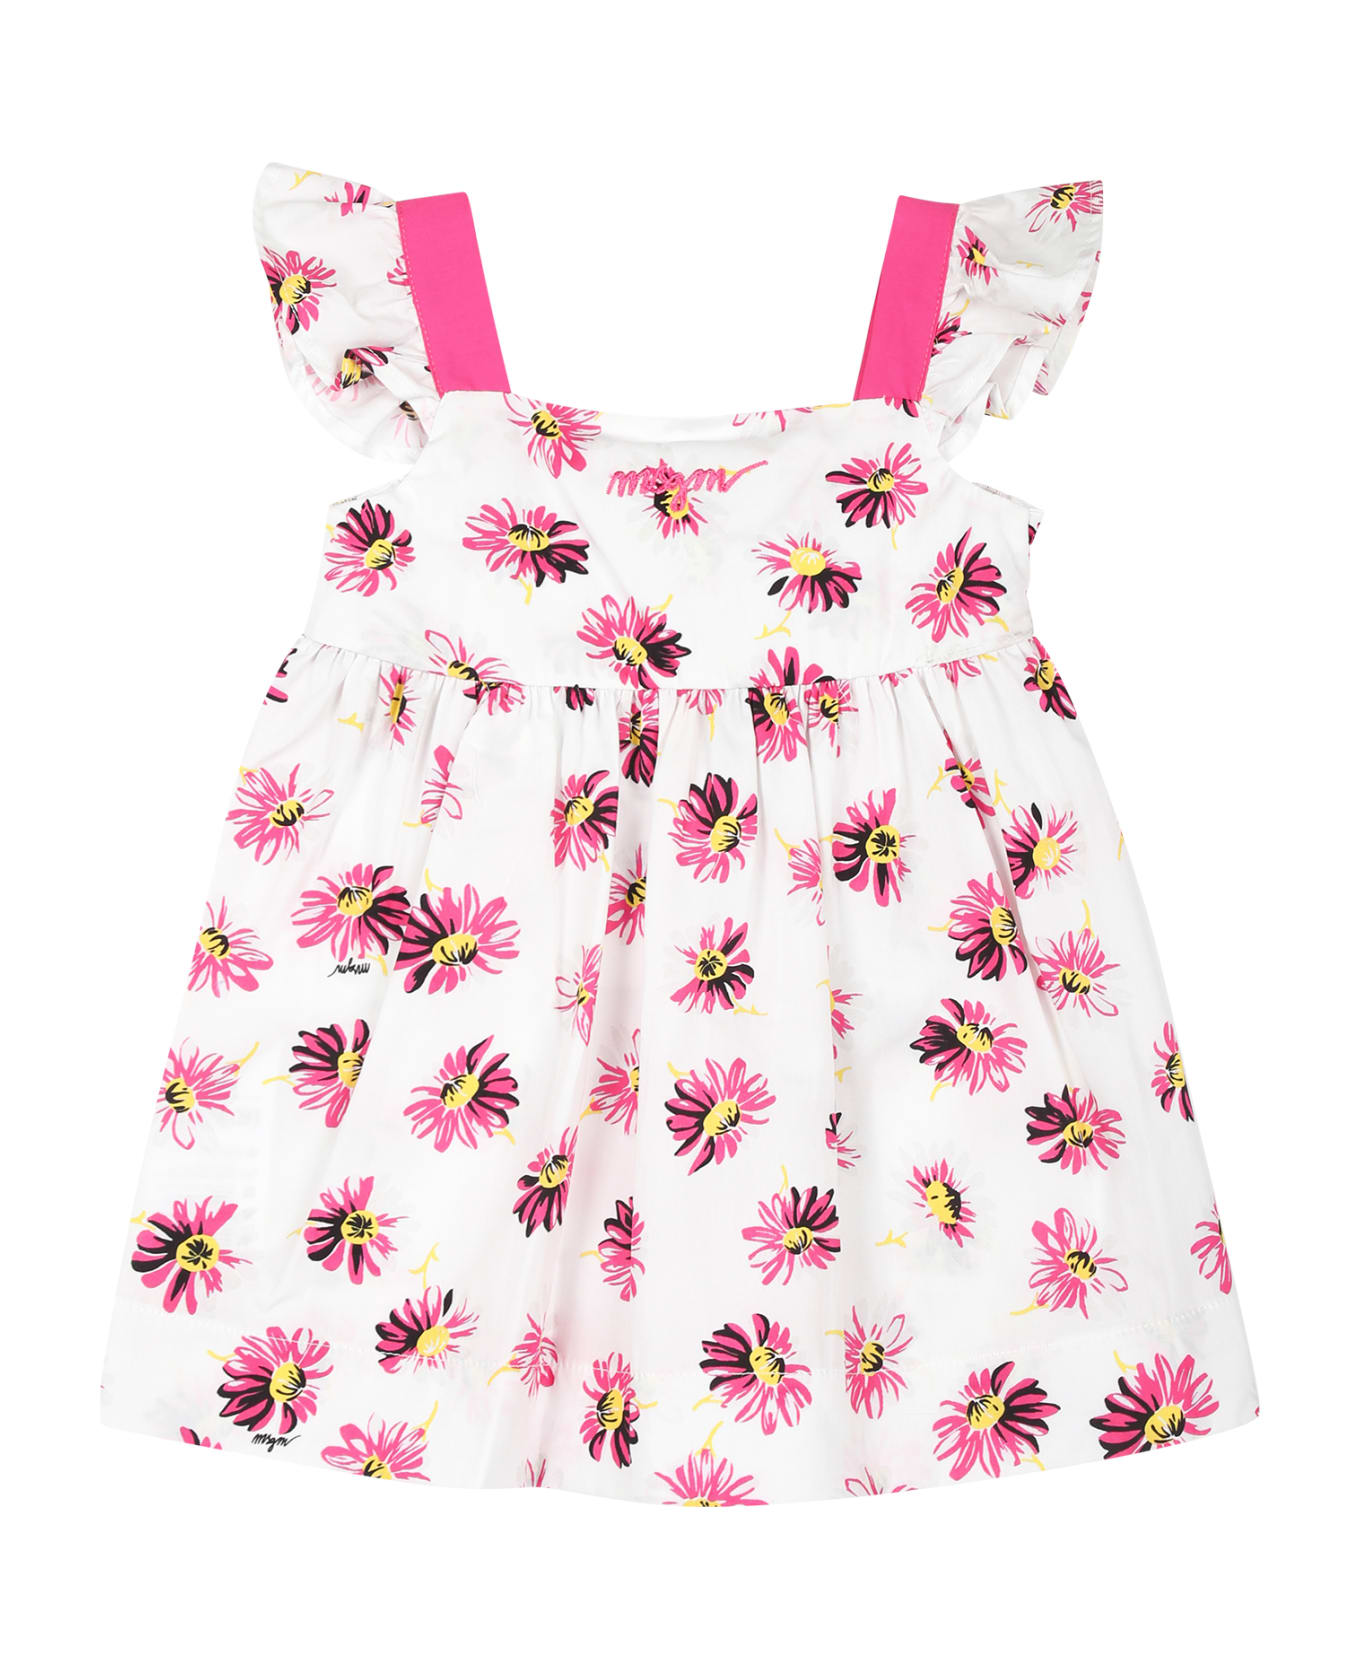 MSGM White Dress For Baby Girl With Flowers Print - White